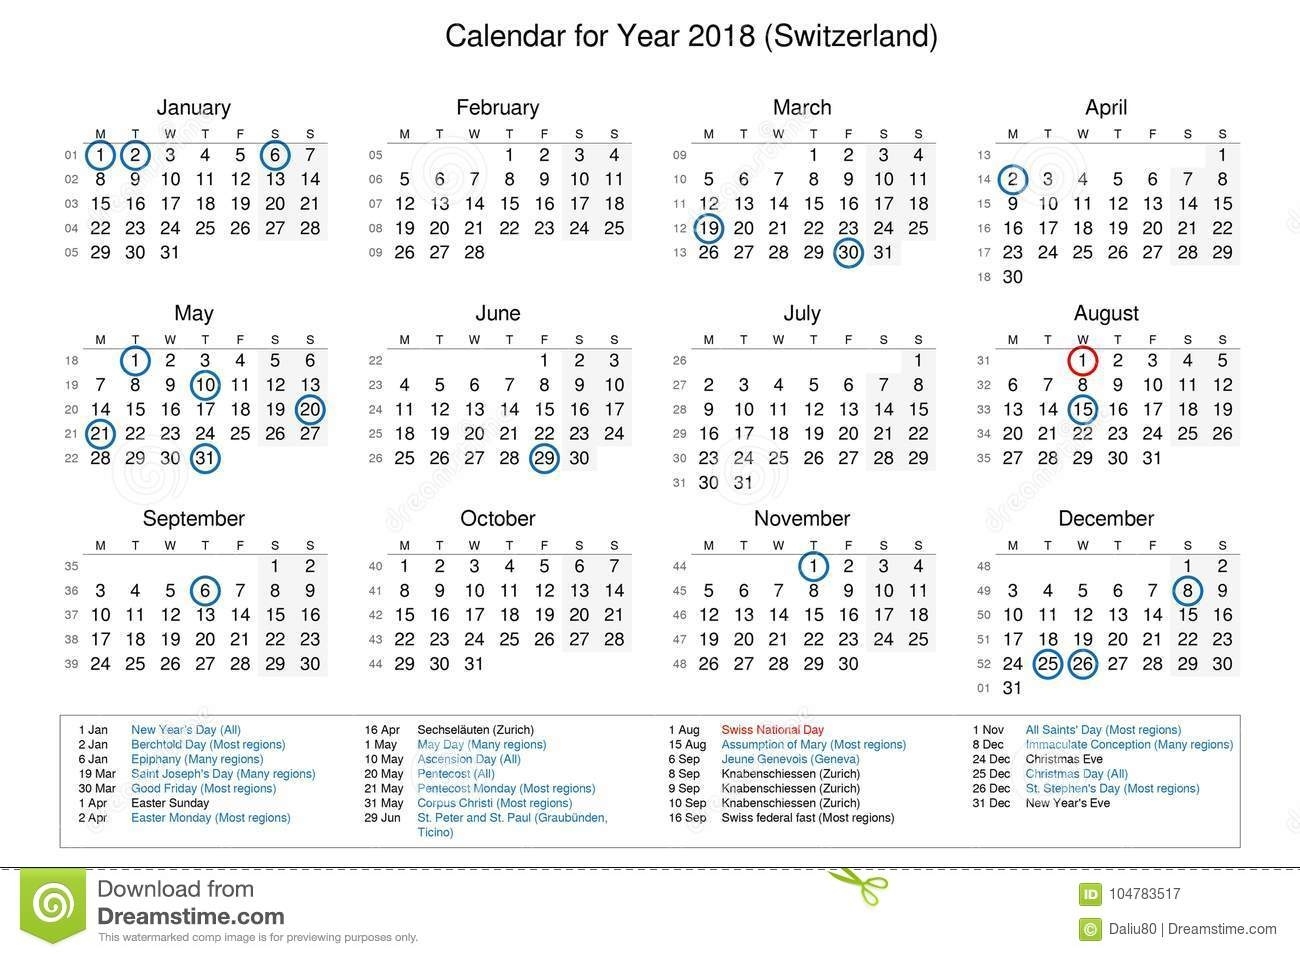 Calendar Of Year 2018 With Public Holidays And Bank Holidays How To Download Zurich Calendar